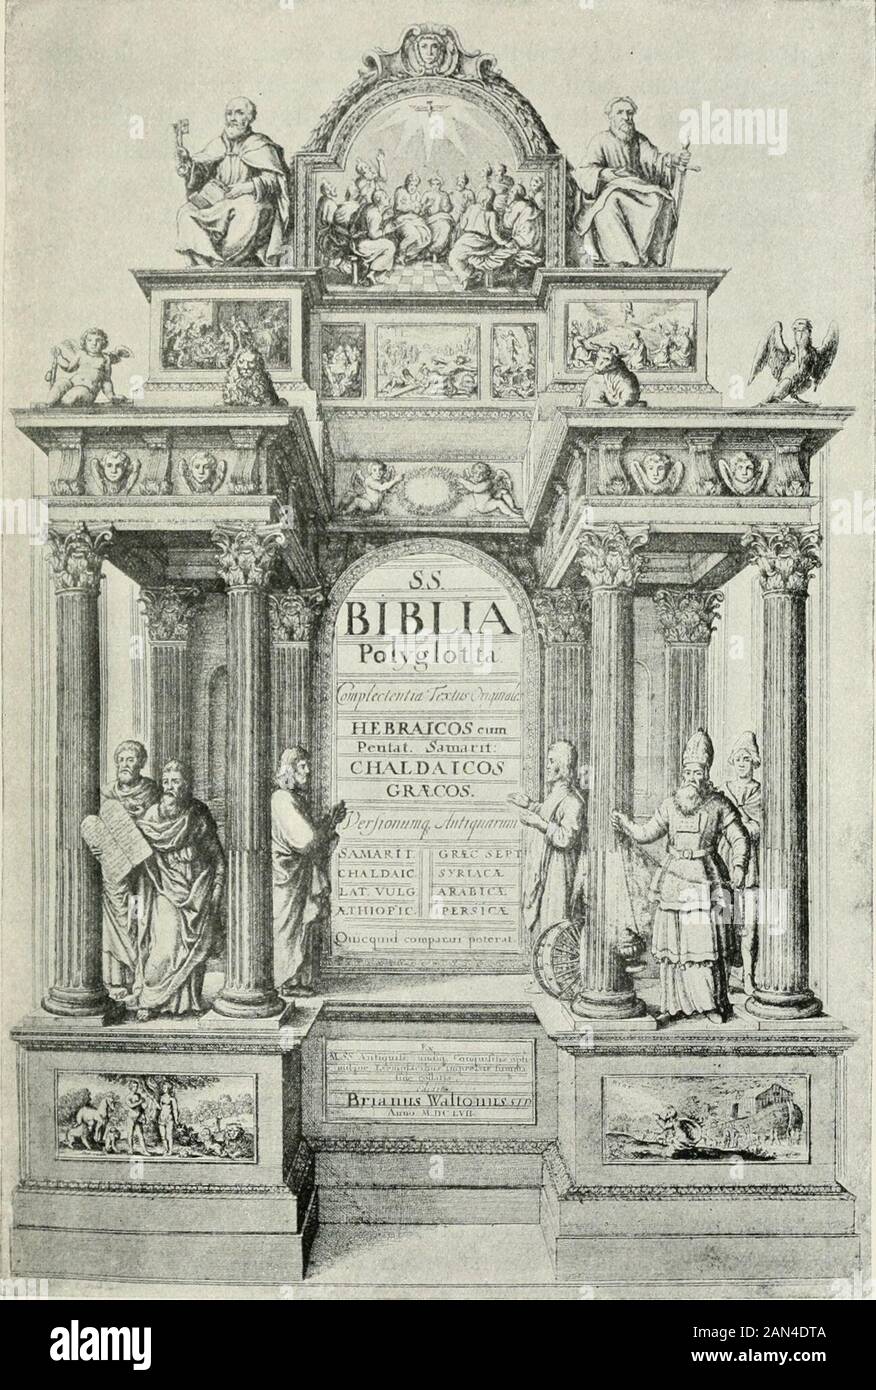 Social England : a record of the progress of the people in religion, laws, learning, arts, industry, commerce, science, literature and manners, from the earliest times to the present day . s and John Overall; among therest, Lively, Spalding, King, and Byng were successivelyProfessors of Hebrew at Cambridge, and Harding and Kilbyeat Oxford. Bedwell was the most distinguished Arabicscholar of his time, while Thompson of Clare, Chaderton ofEmmanuel, and Miles Smith of Brasenose were celebrated fortheir knowledge of ancient languages.* An important impulsewas given to the study of Oriental languag Stock Photo